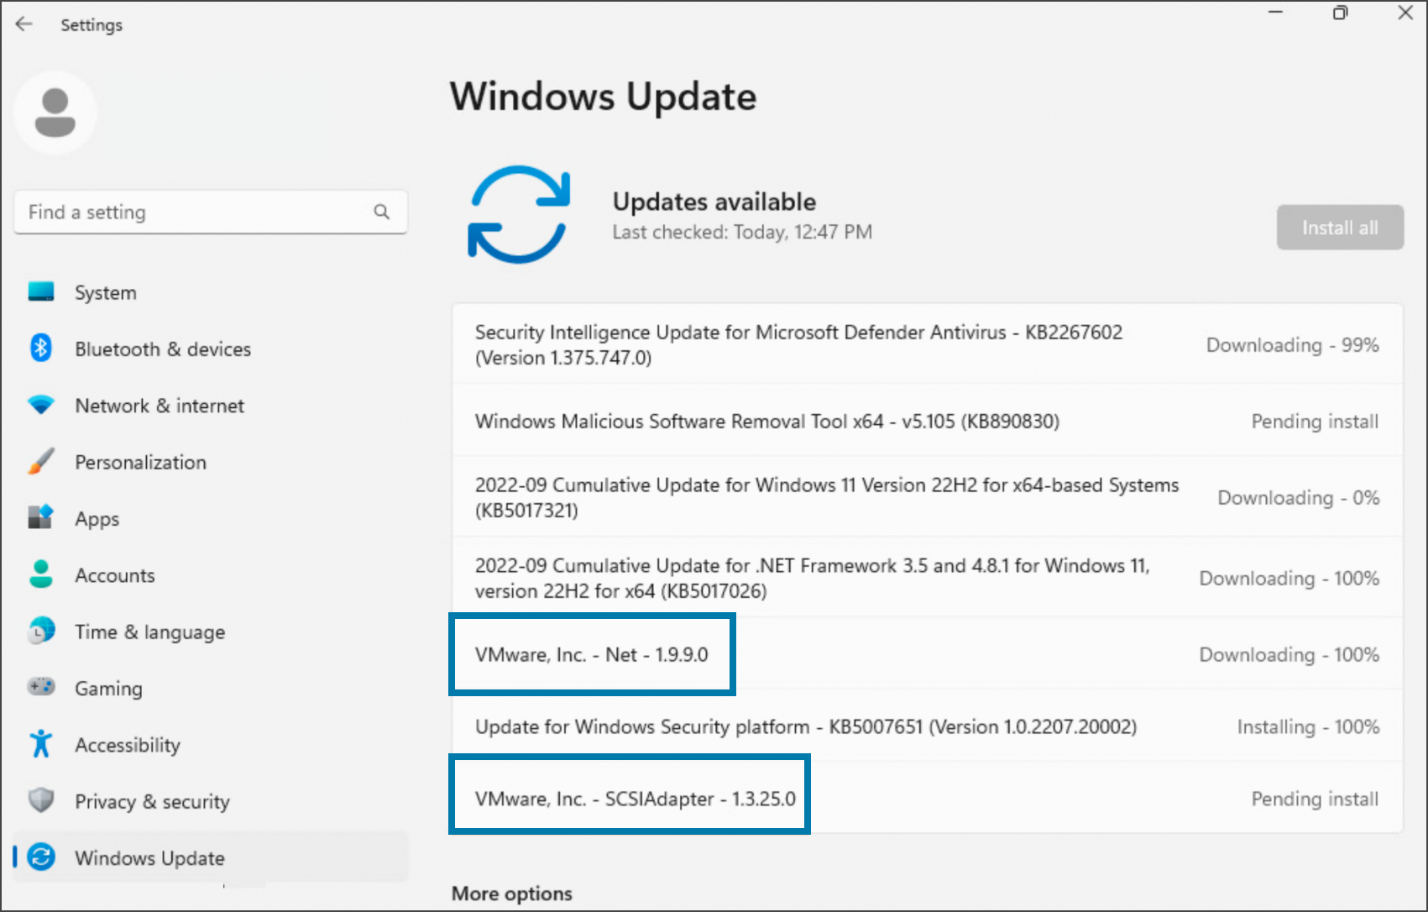 VMware PVSCSI and VMXNET3 drivers included in Windows Updates